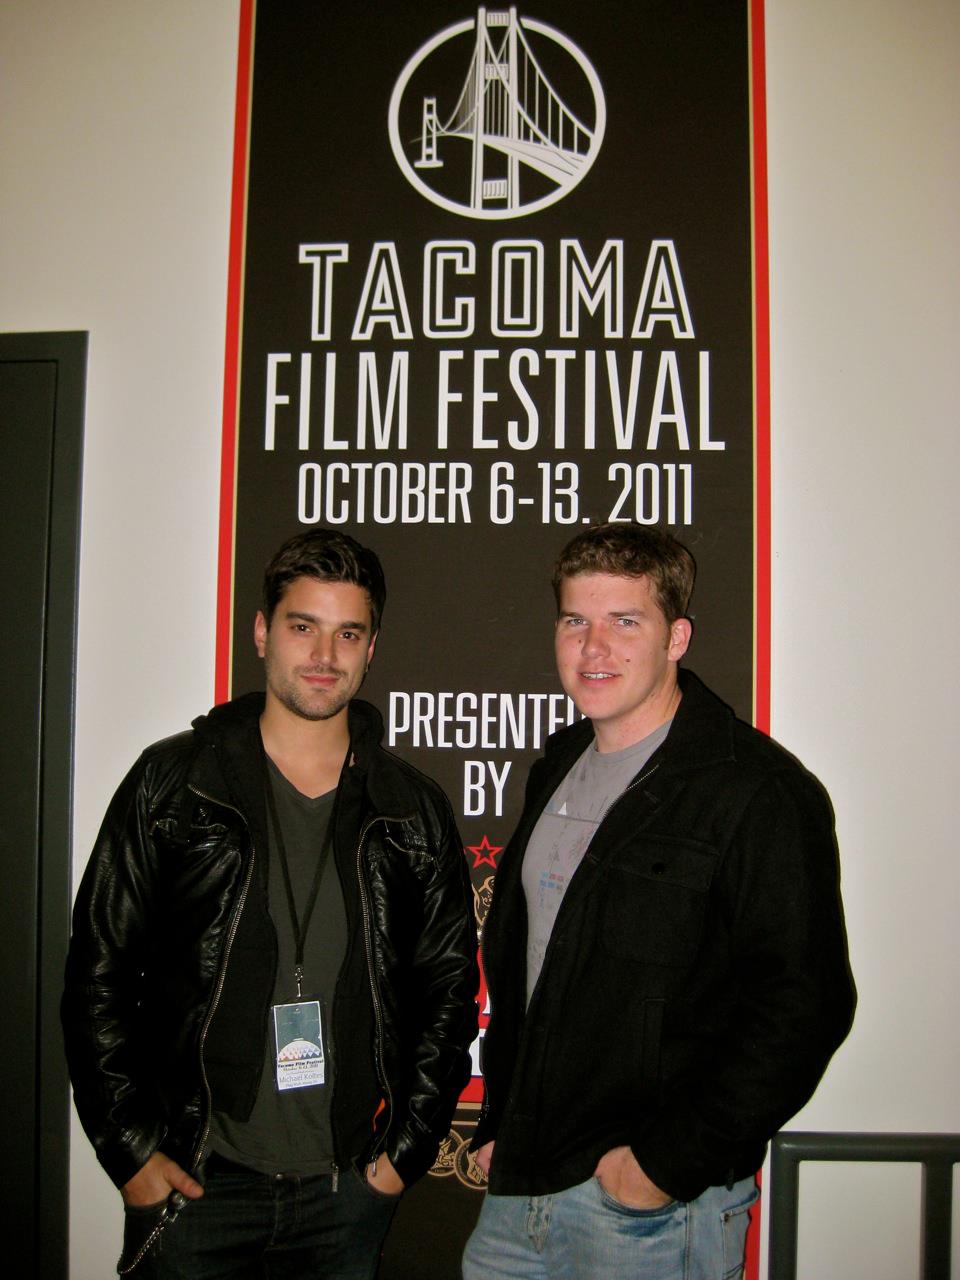 Christopher Slaughter and Michael Koltes at the Tacoma Film Festival